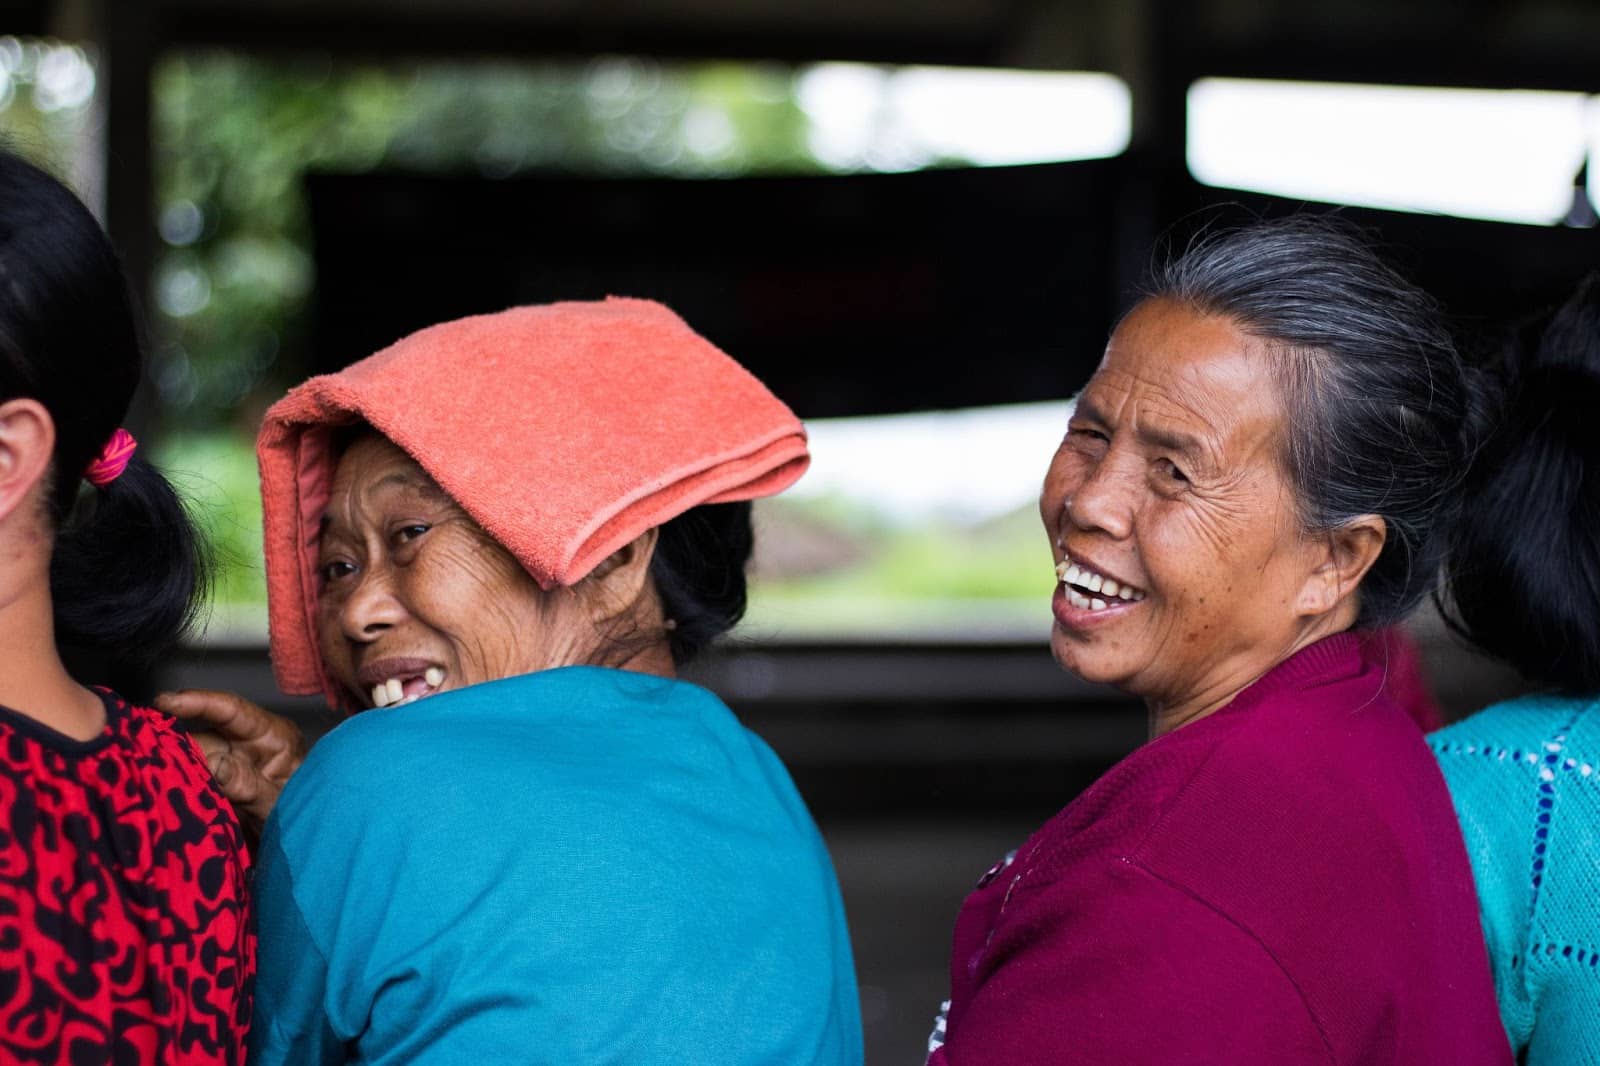 Culture In Indonesia: Women Who Laugh